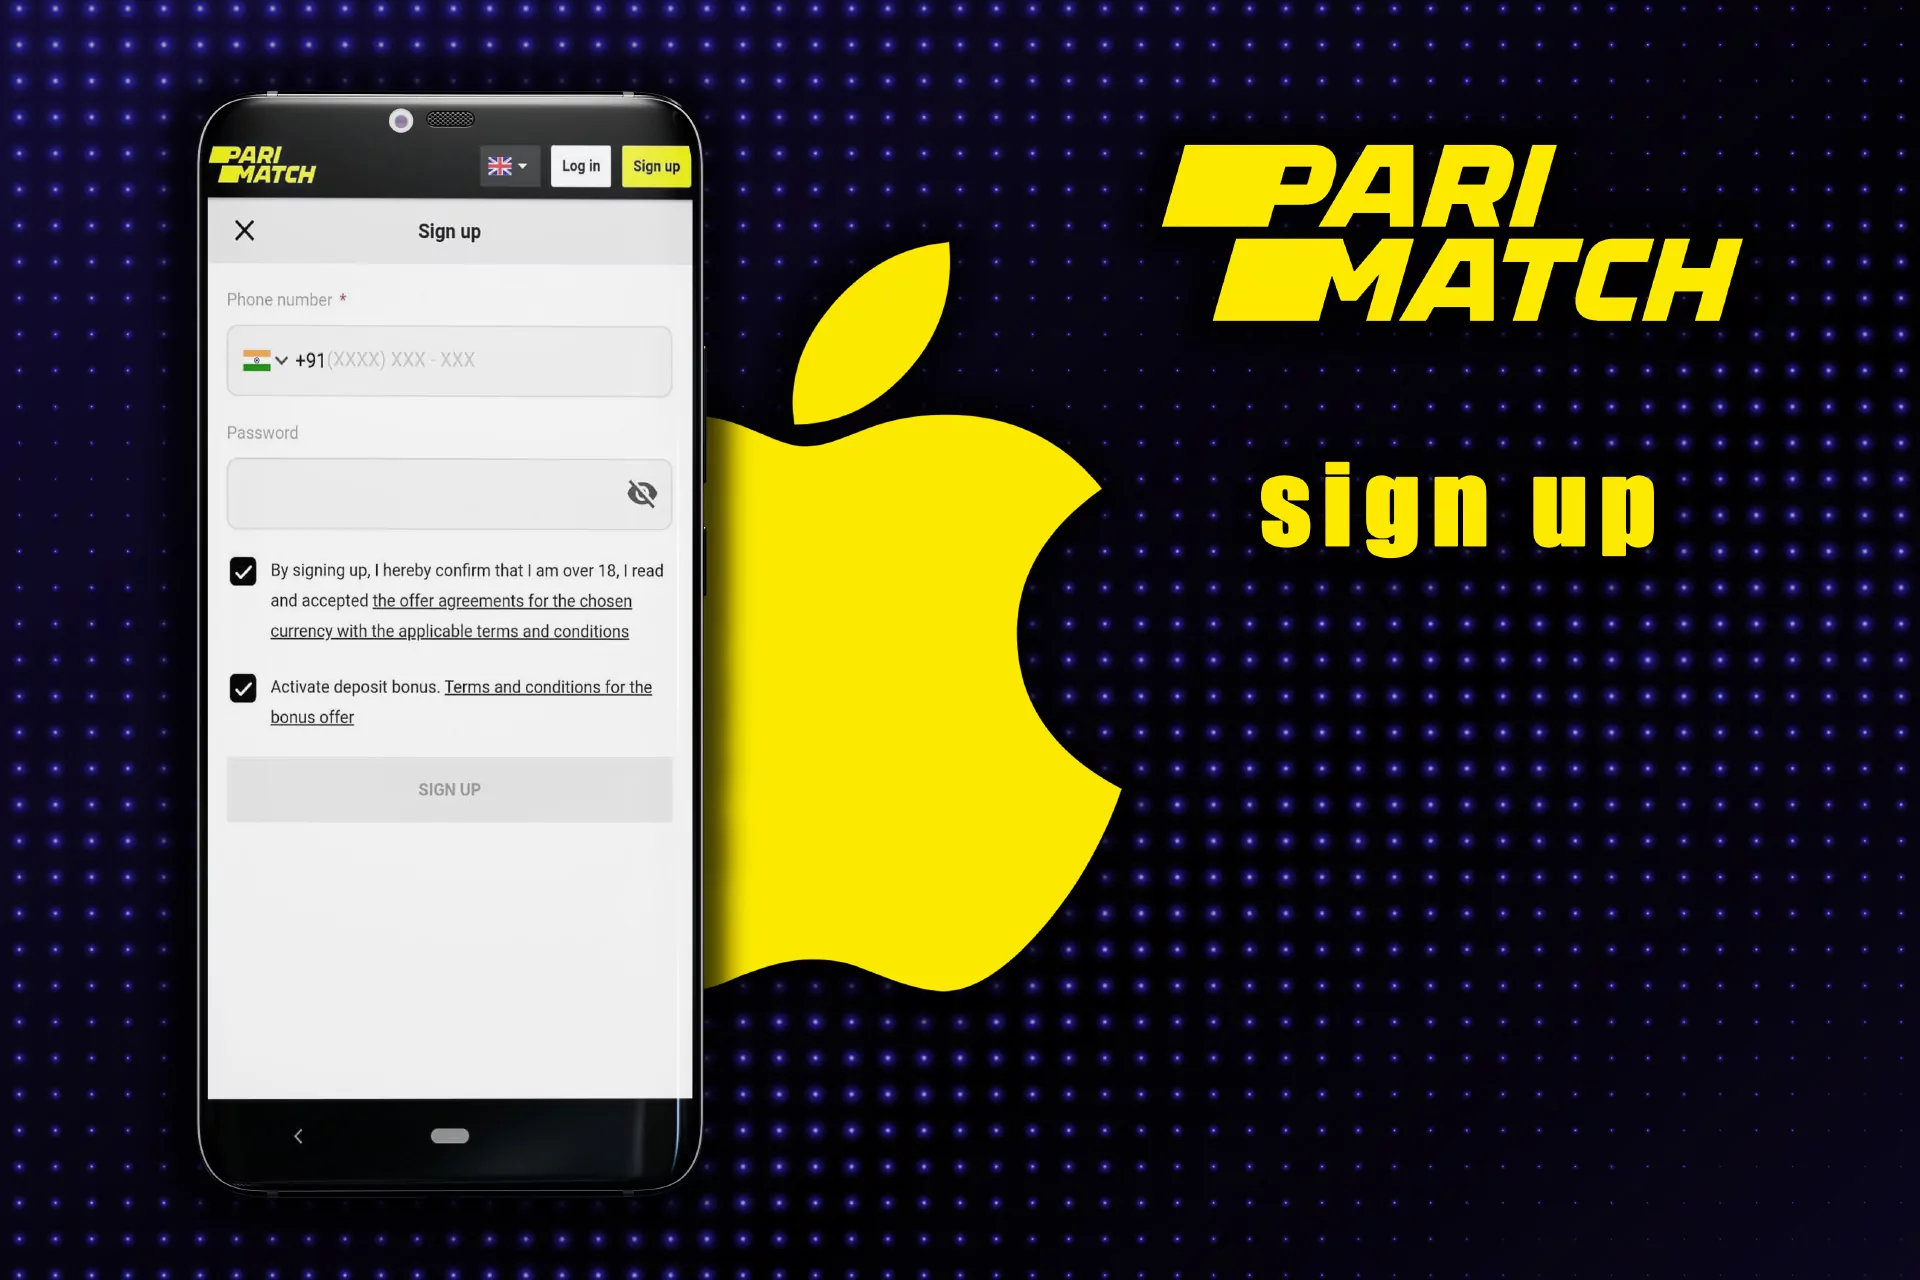 Press the 'Sign up' button and create a new account on Parimatch.